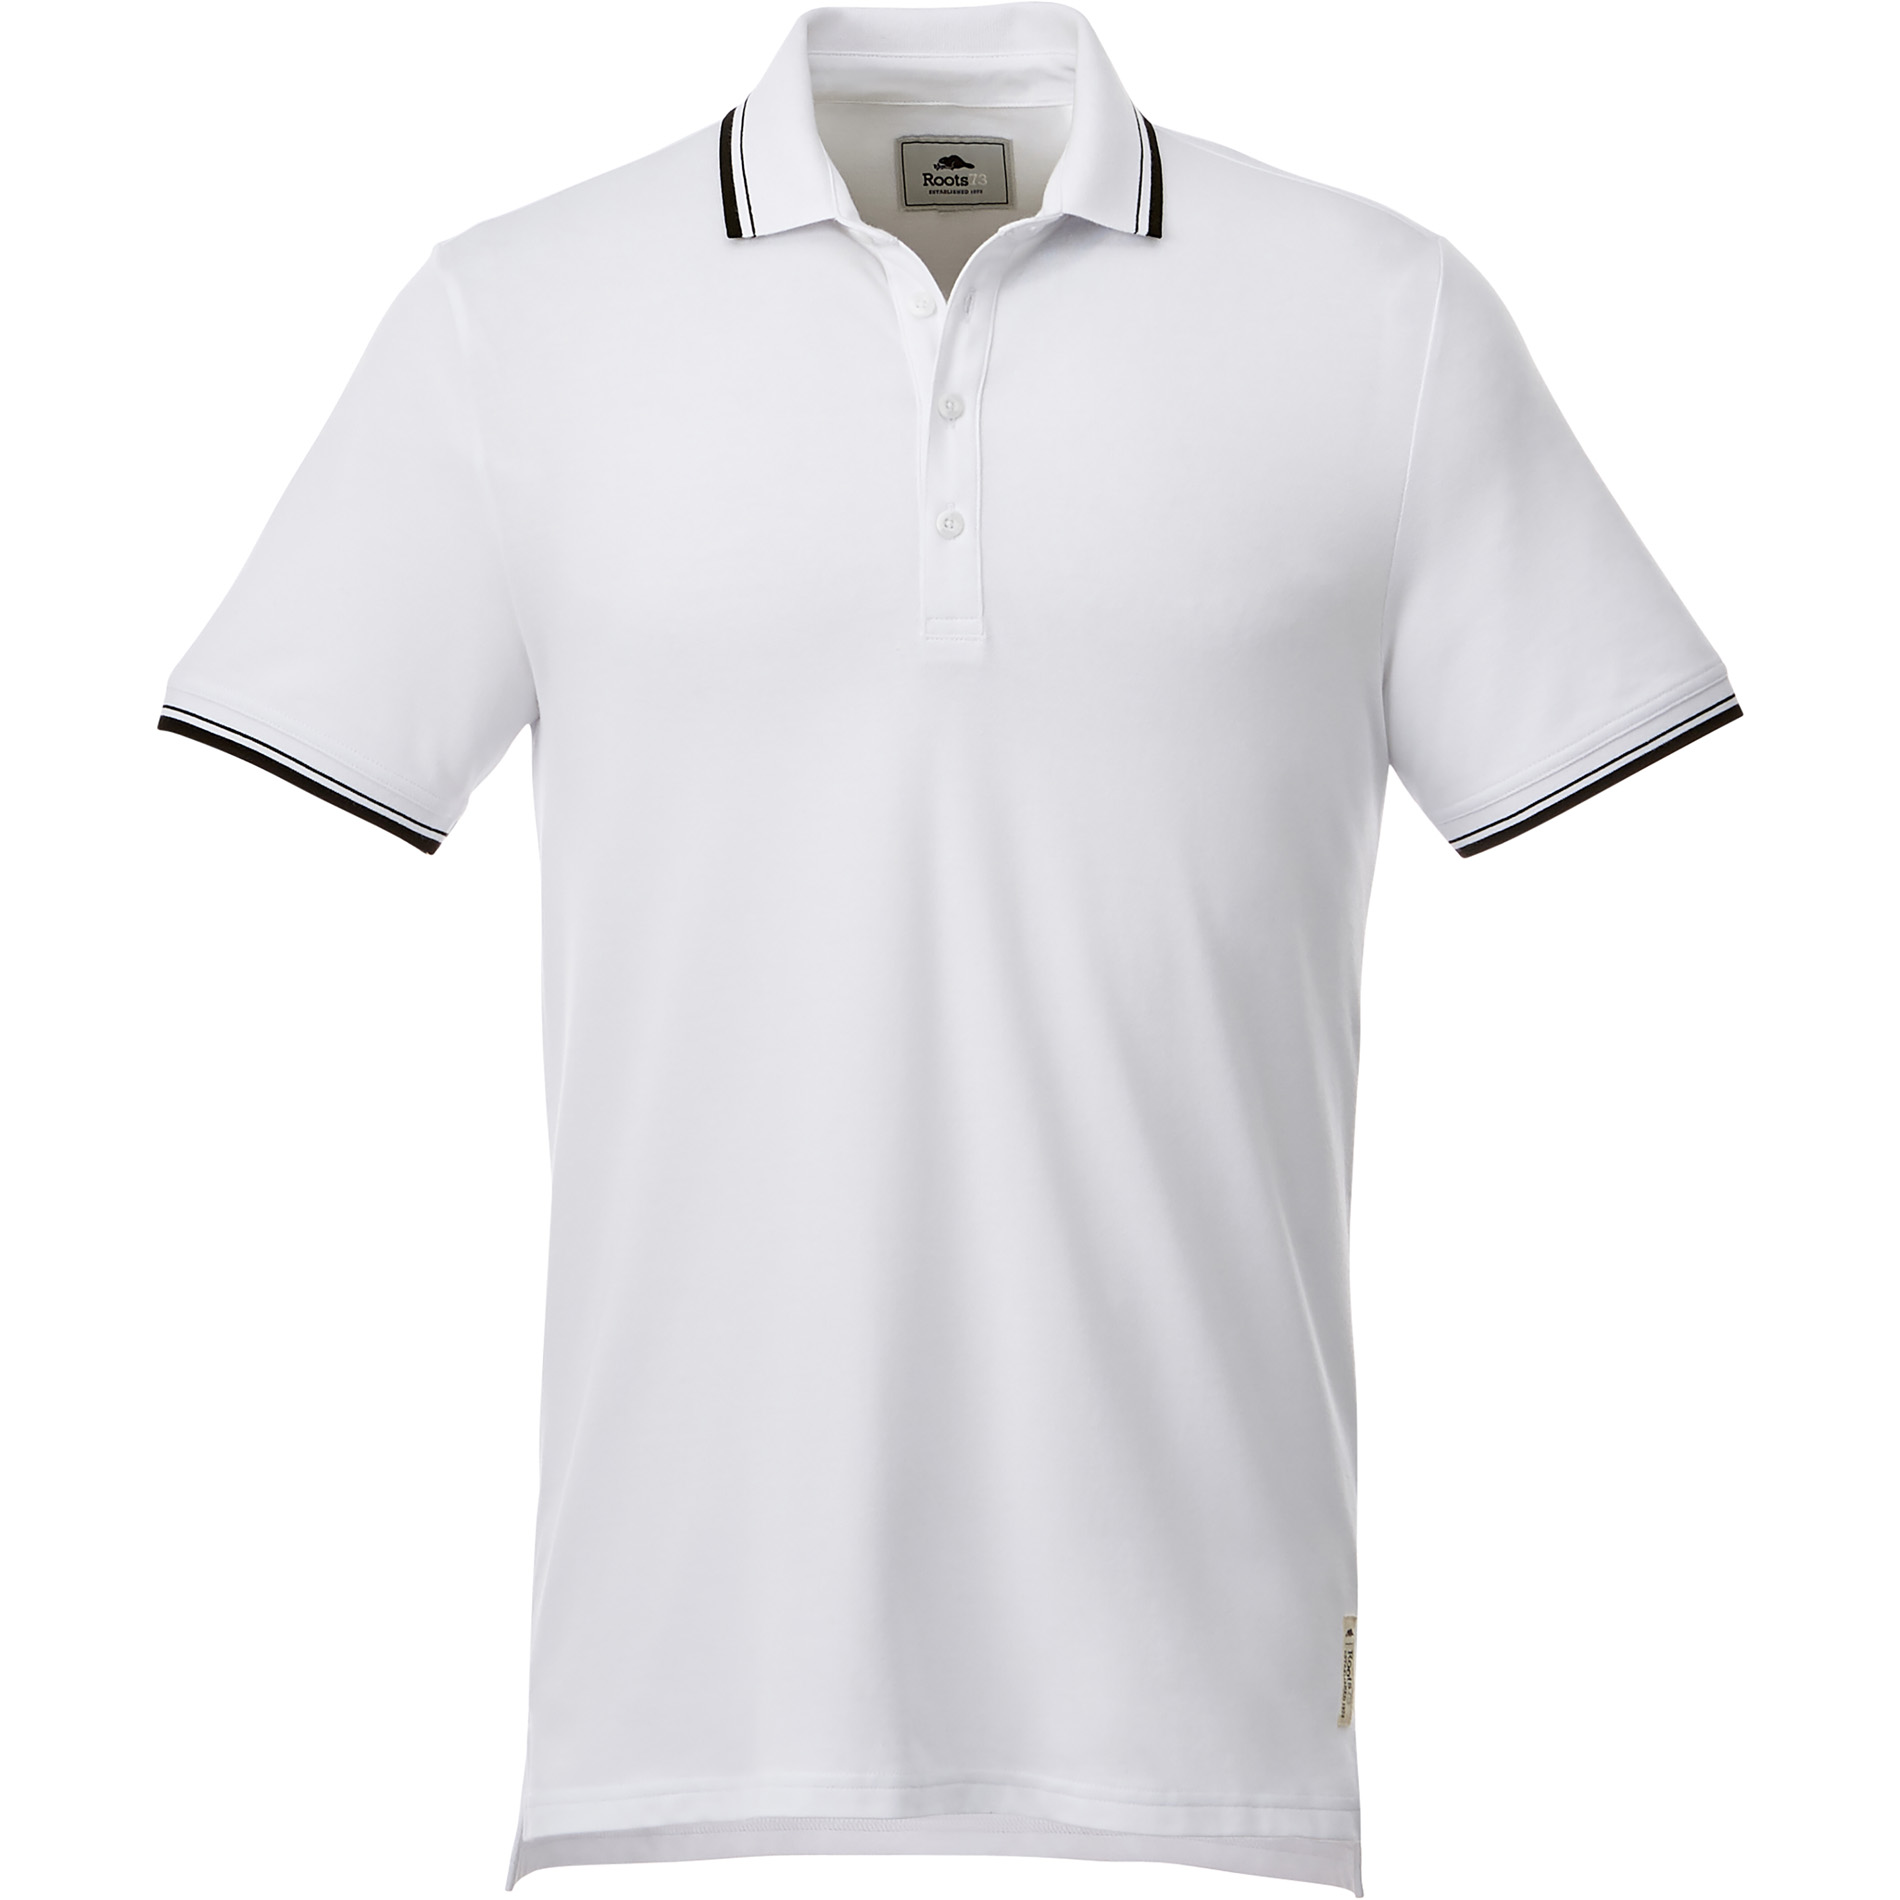 Roots73 TM16613 - M-LIMESTONE Roots73 SS Polo